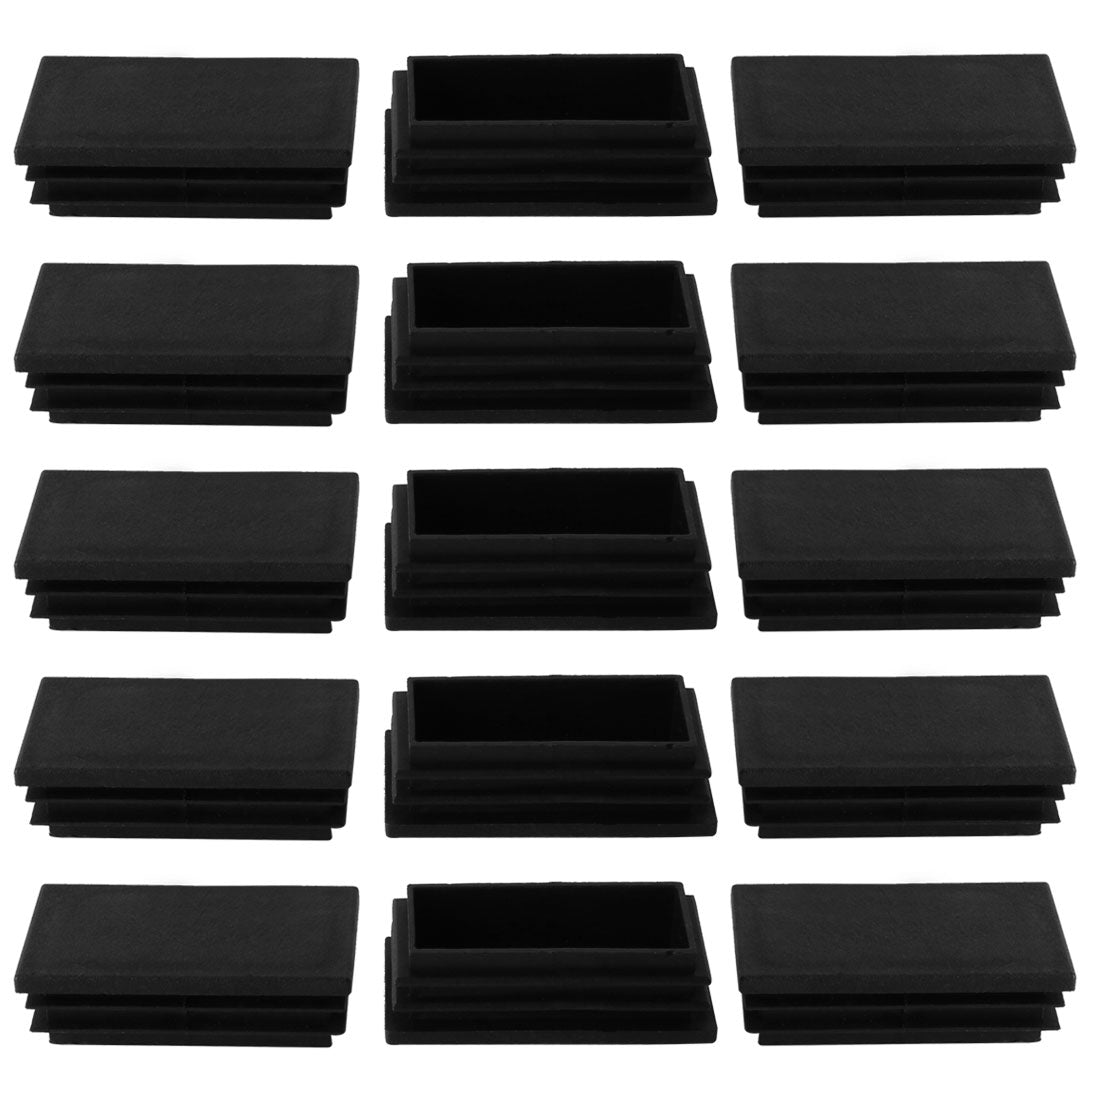 Uxcell Uxcell 15pcs 30 x 50mm Plastic Rectangle Ribbed Tube Inserts End Cover Cap Furniture Chair Table Feet Floor Protector